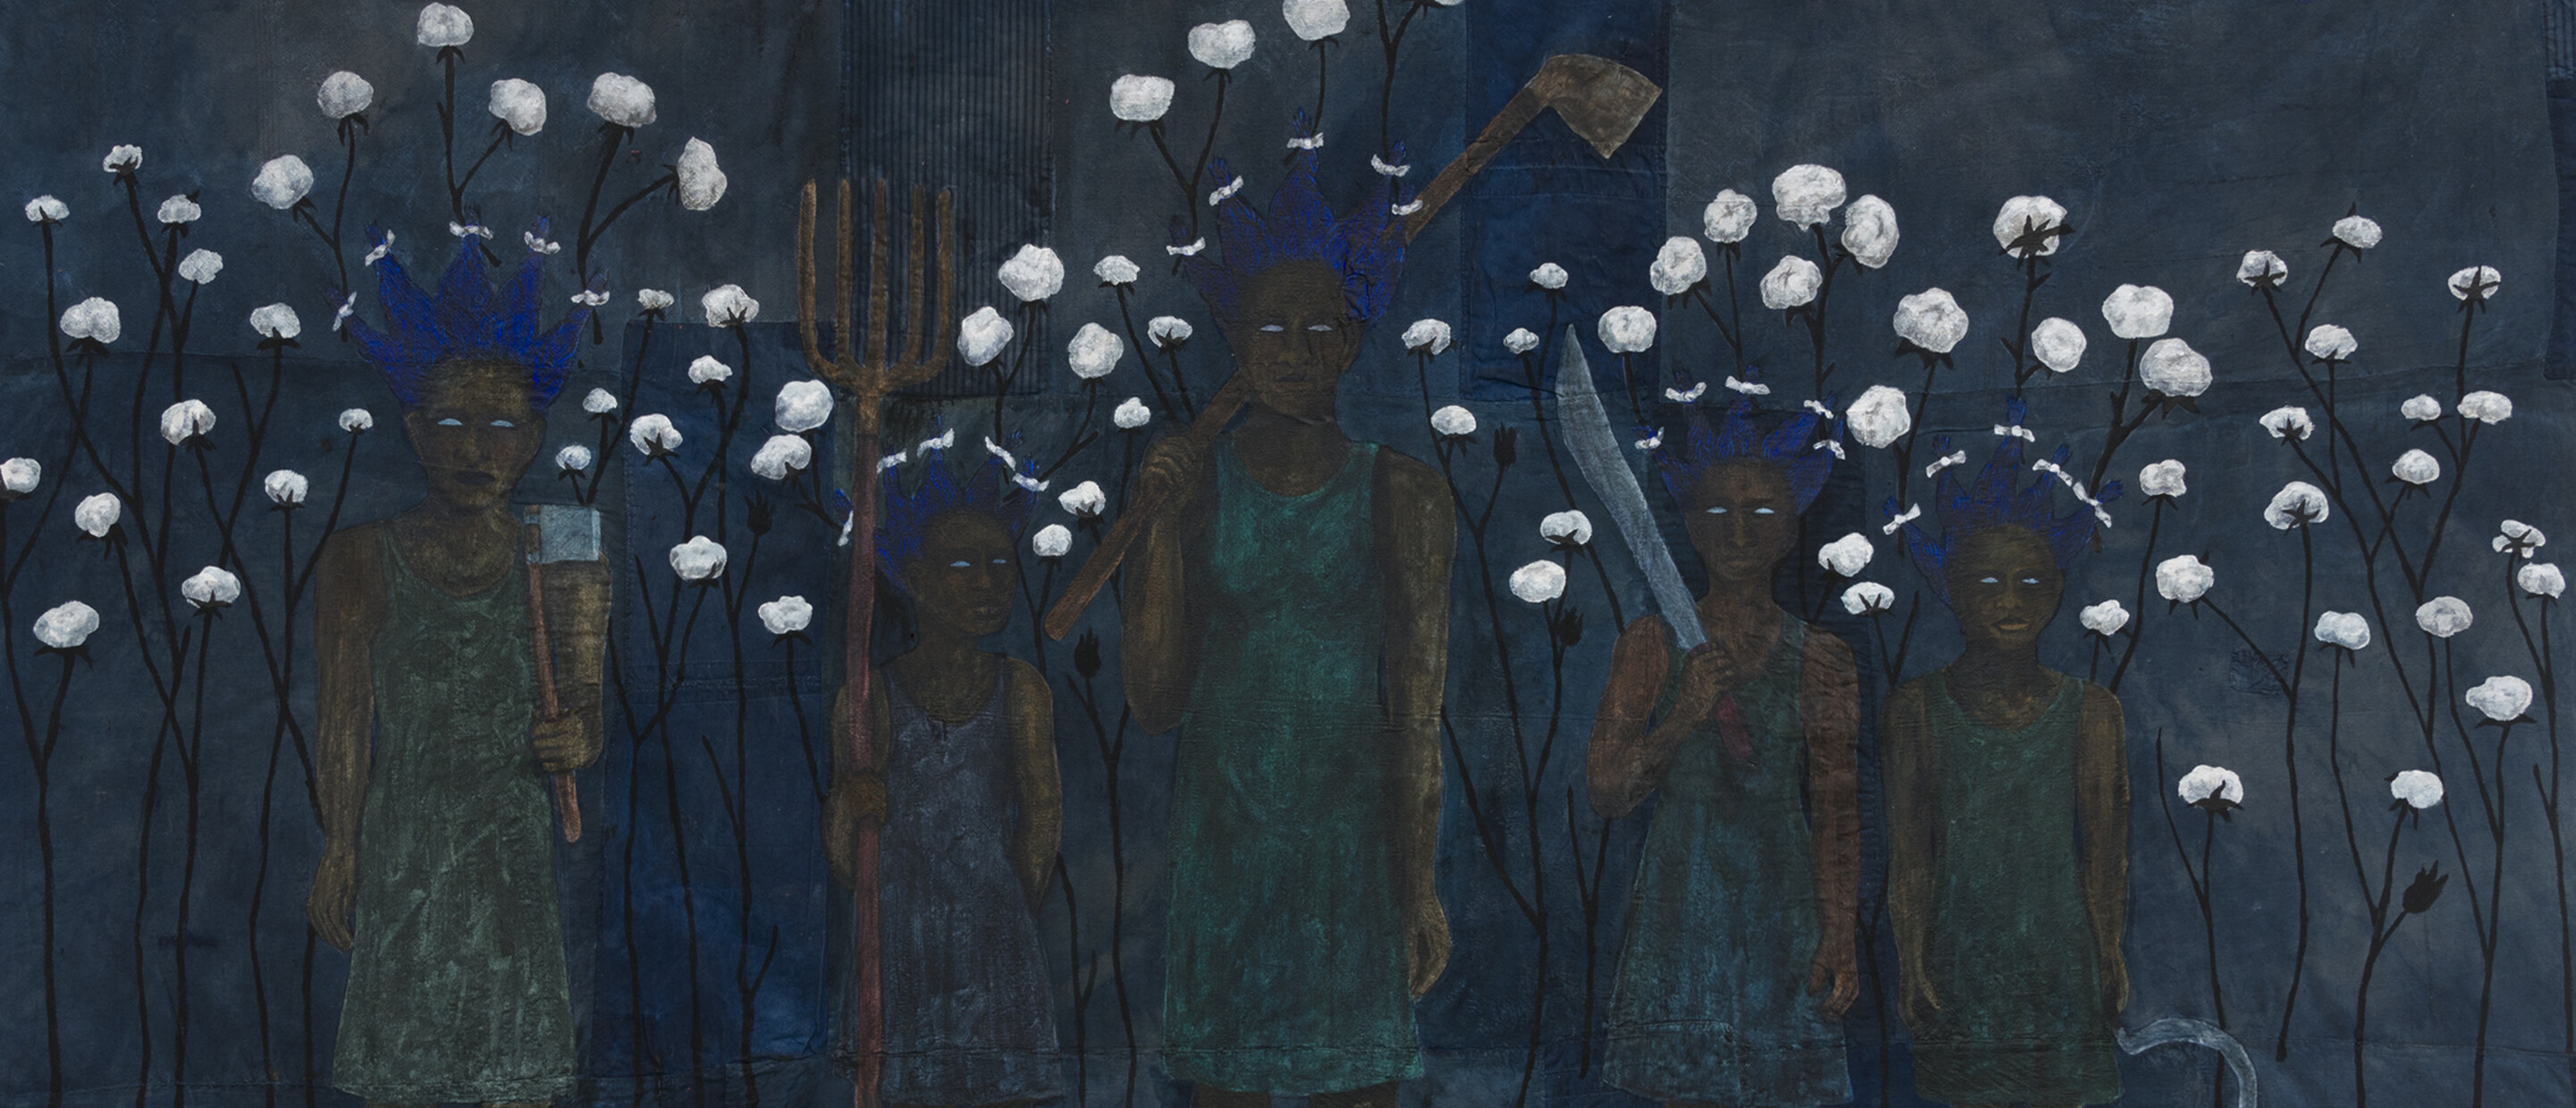 Painting of several figures with elongated hair strands with cotton 